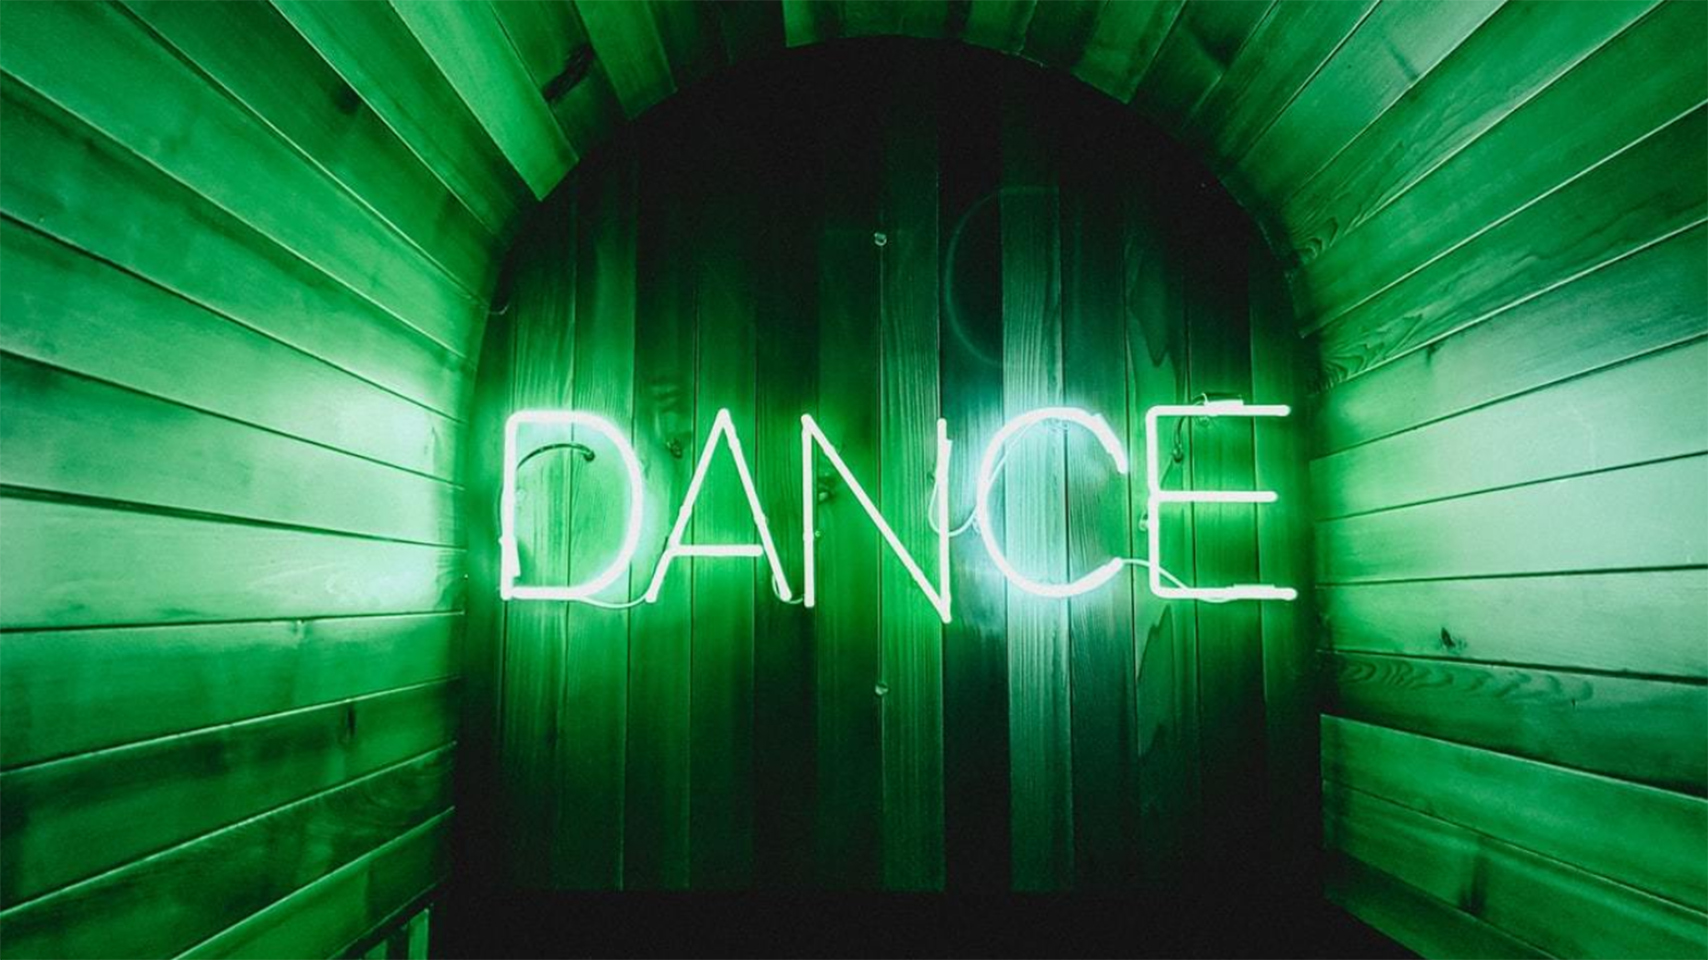 A neon sign of the word "Dance"